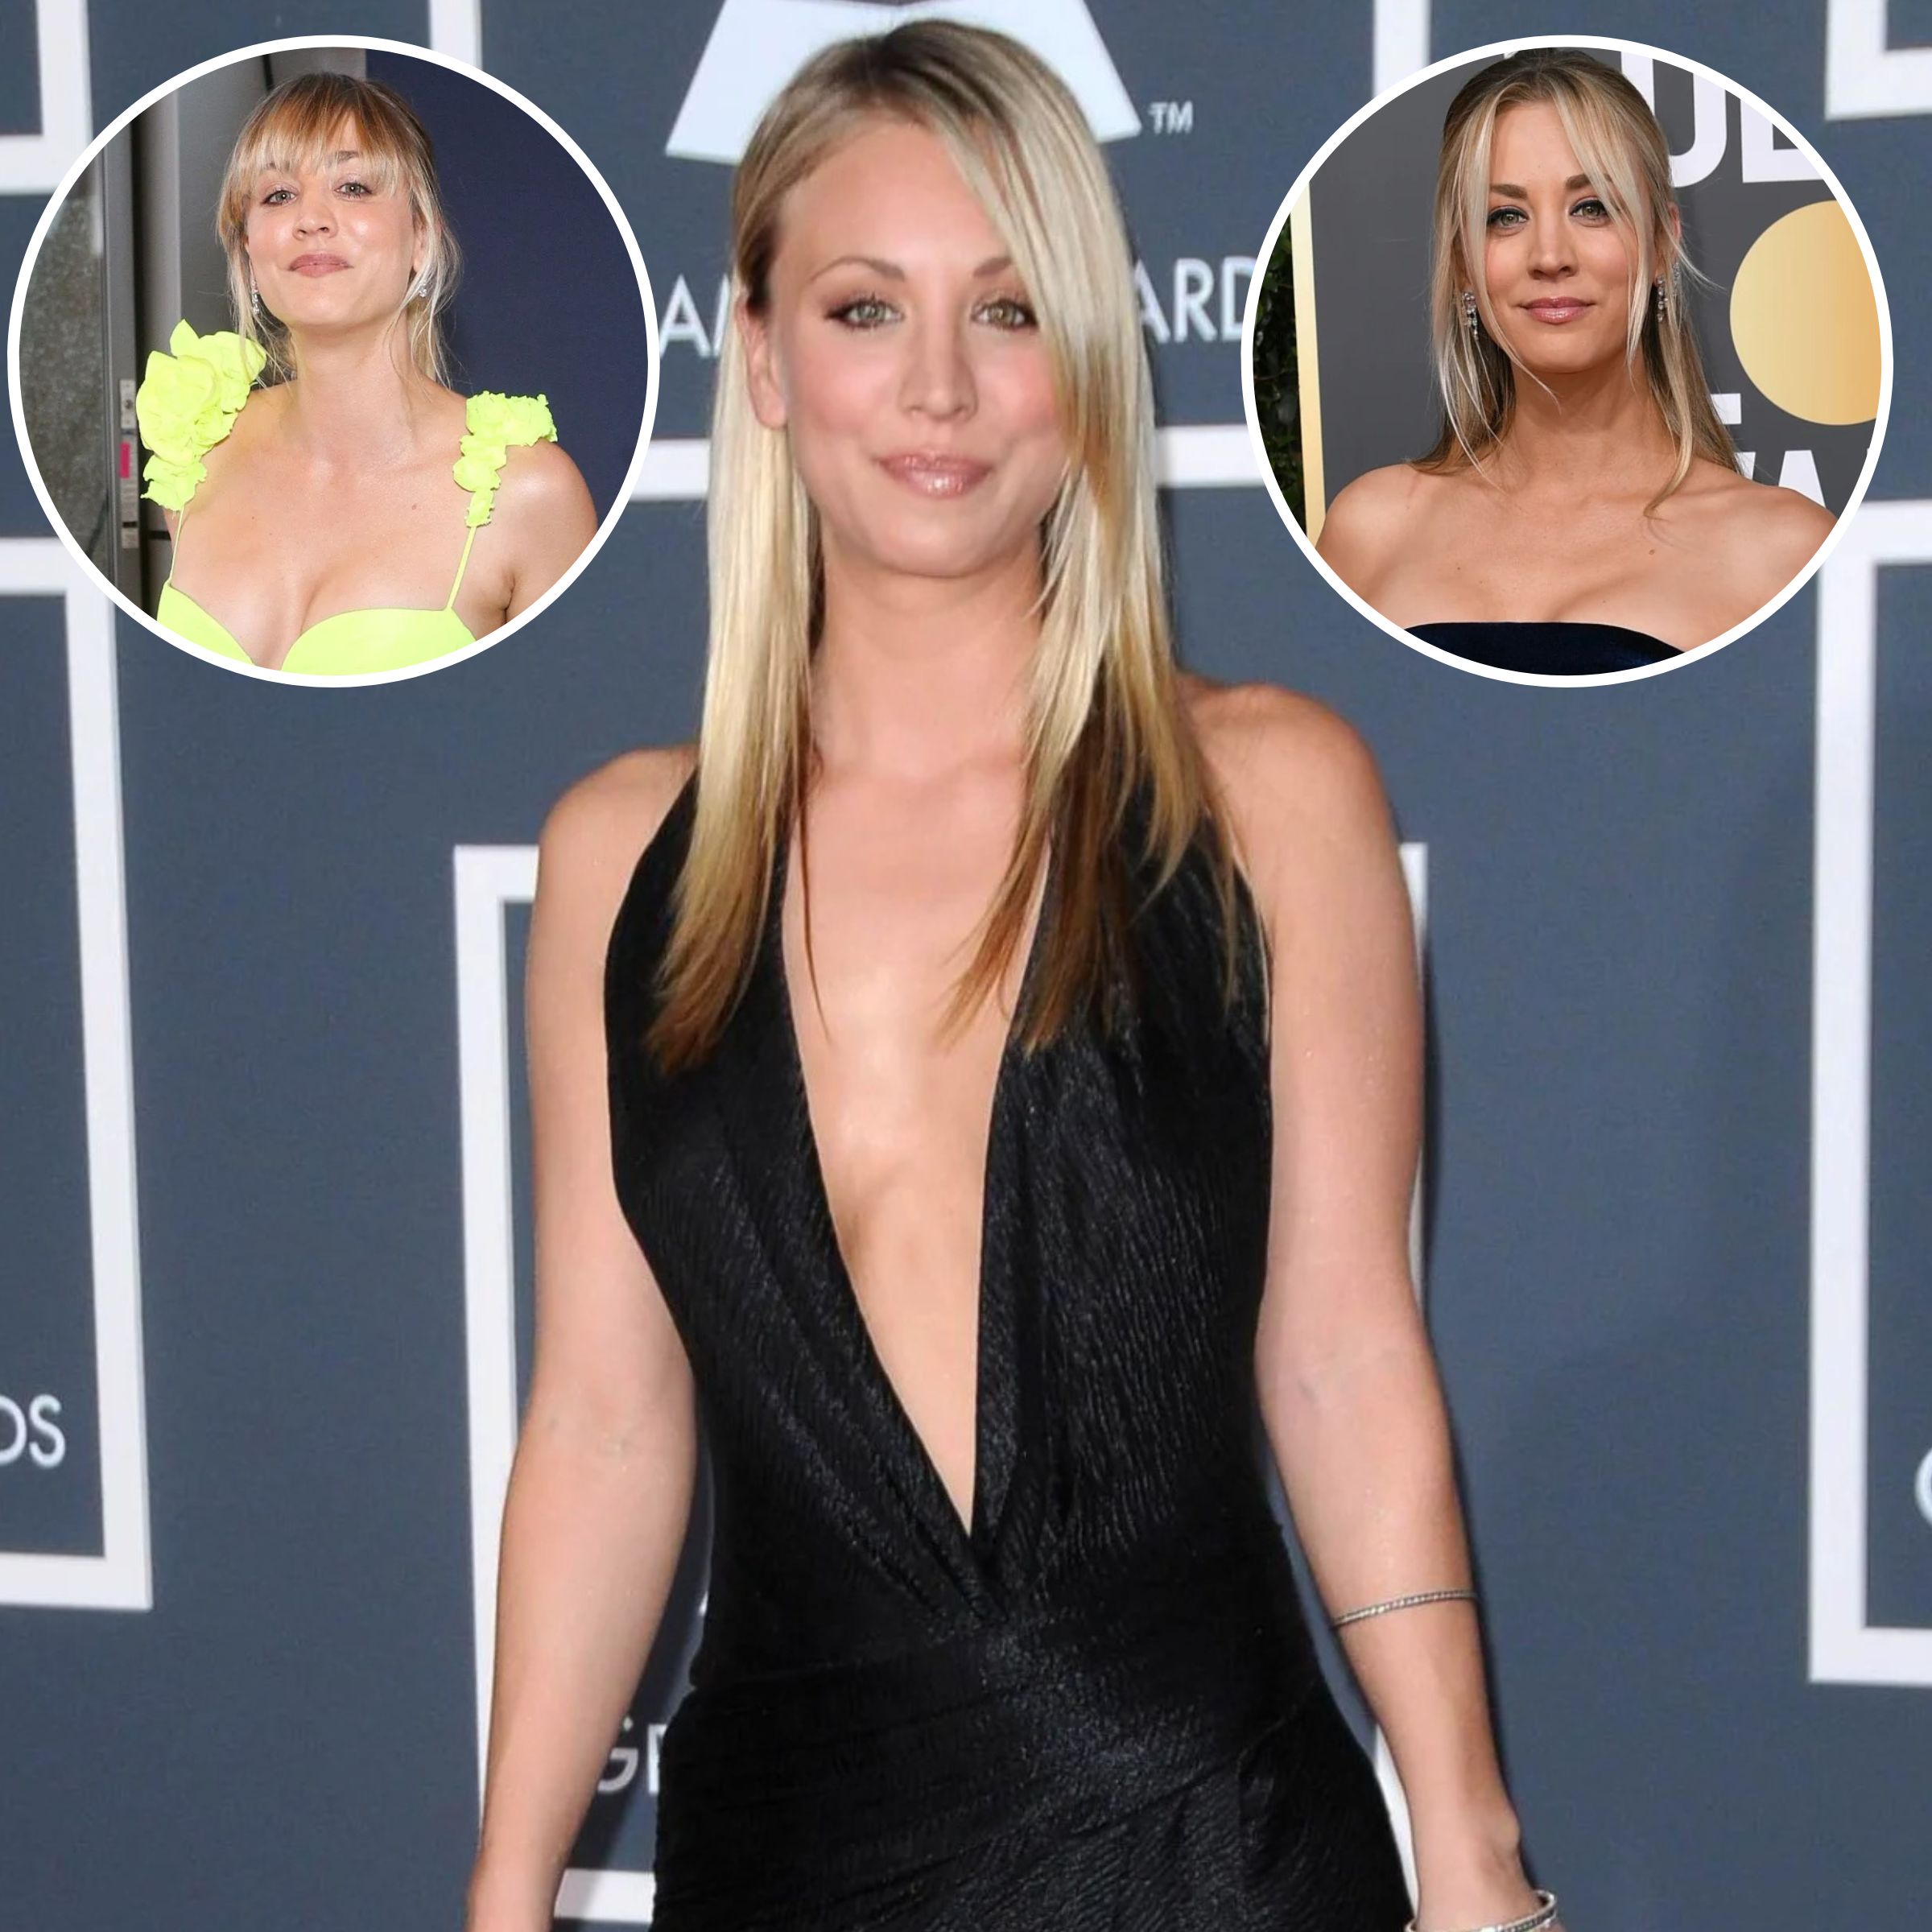 Cuoco Sex Porn - Kaley Cuoco Braless: Photos of the Actress Without a Bra